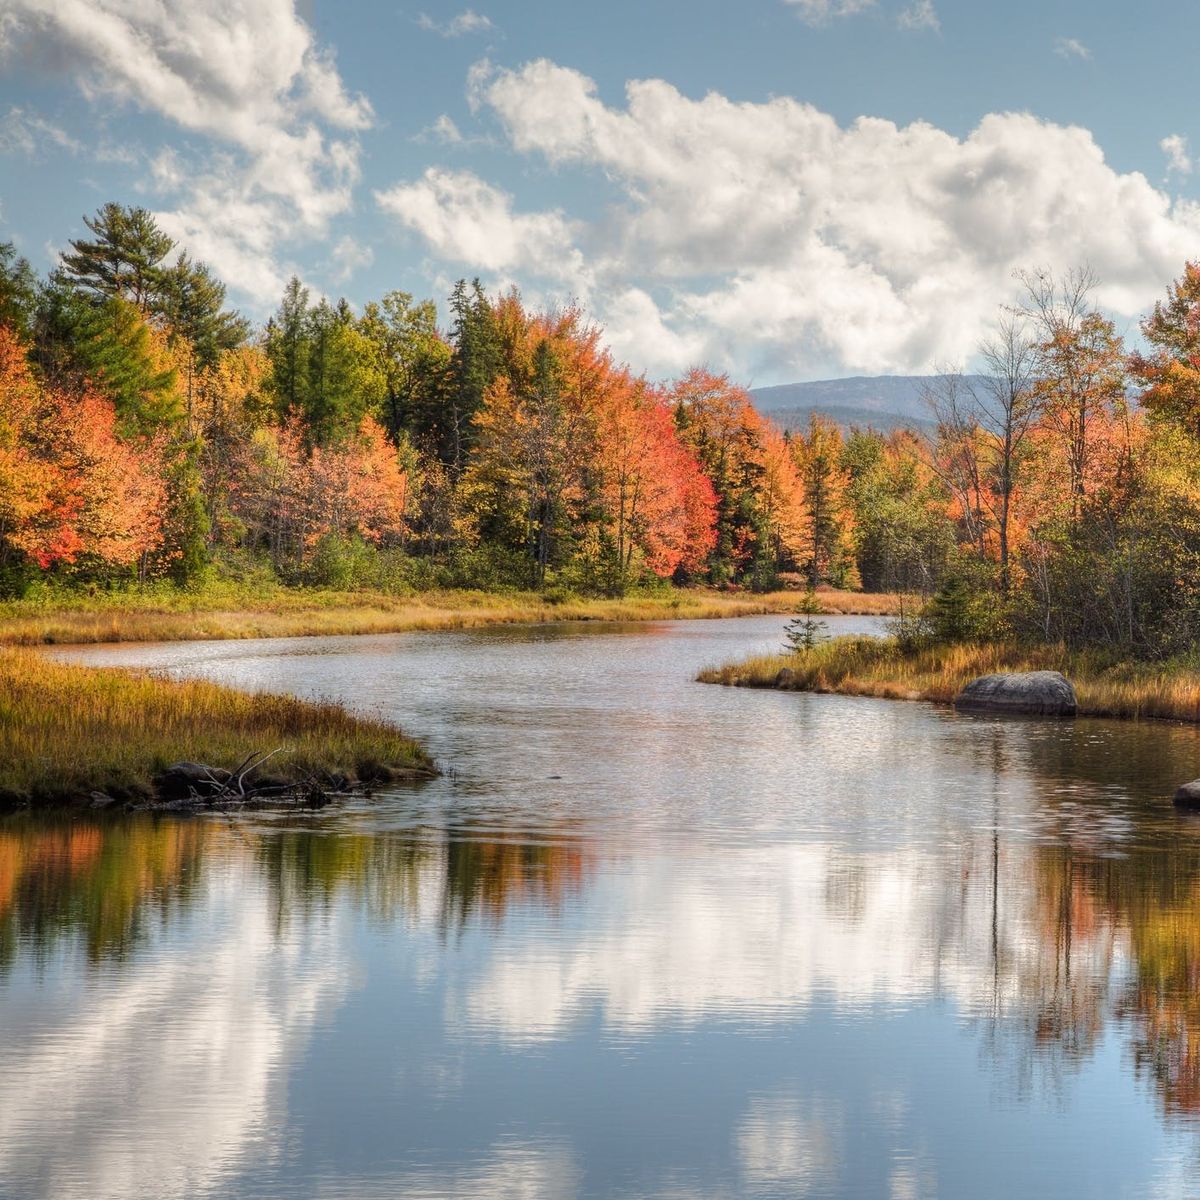 8 US Destinations to Get Your Fall Foliage Fix